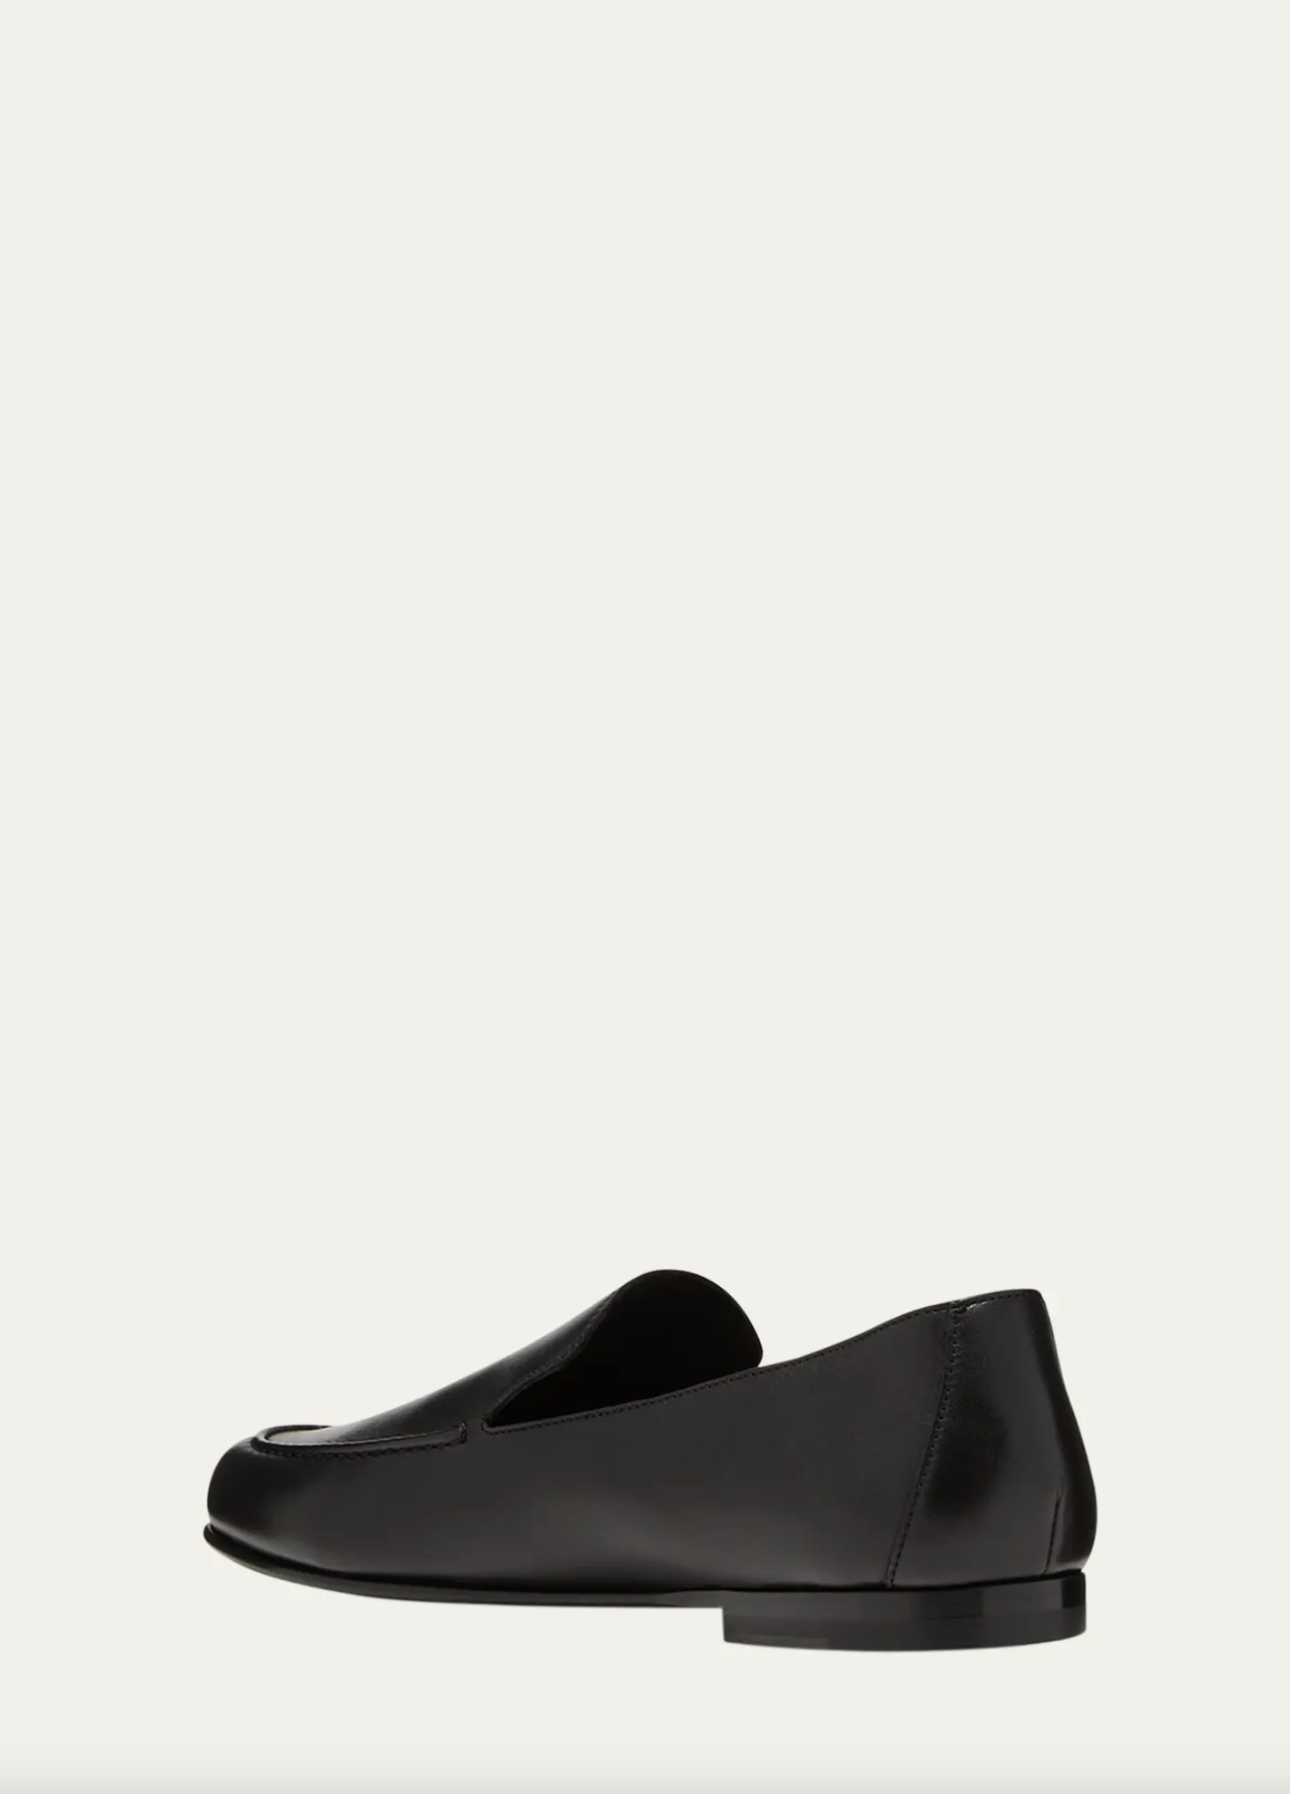 Colette Loafer Chocolate